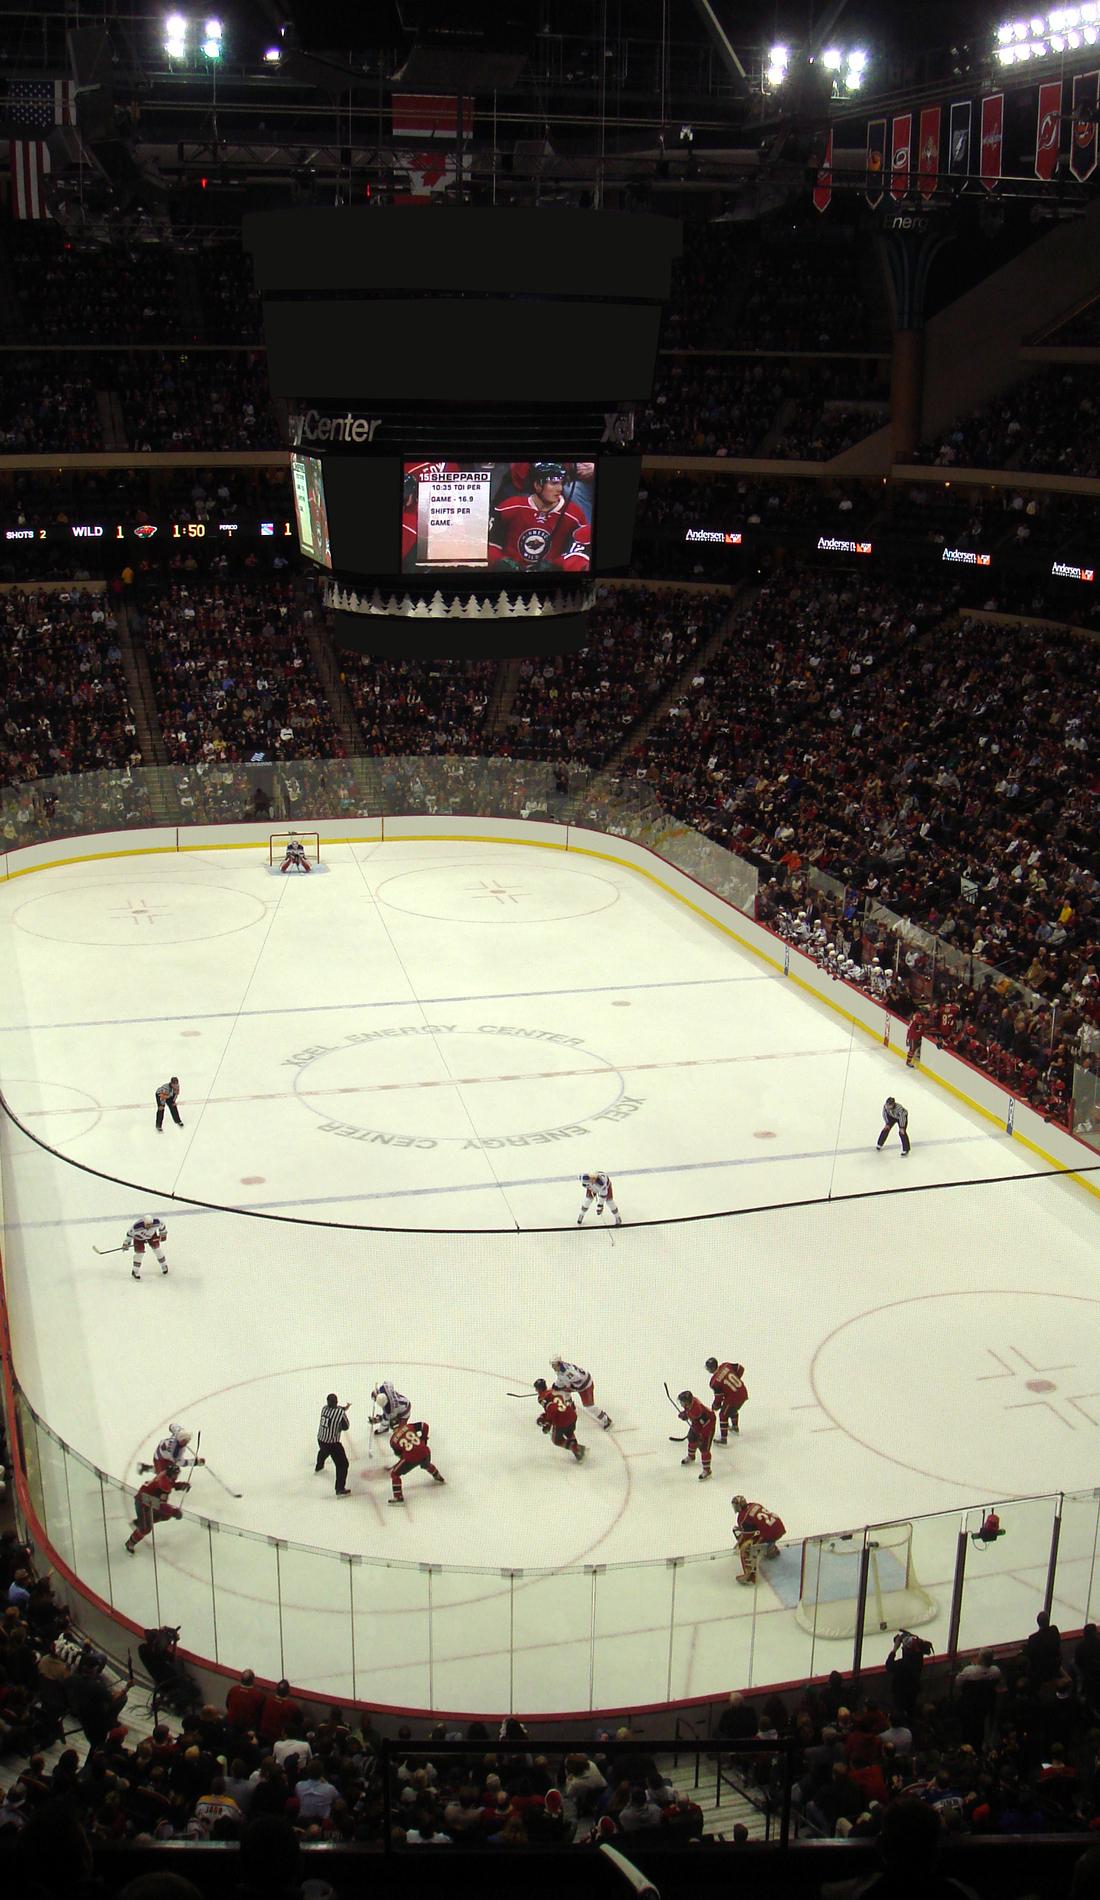 Xcel Energy Center, Home of the Minnesota Wild, Minnesota sports, concert  and event arena